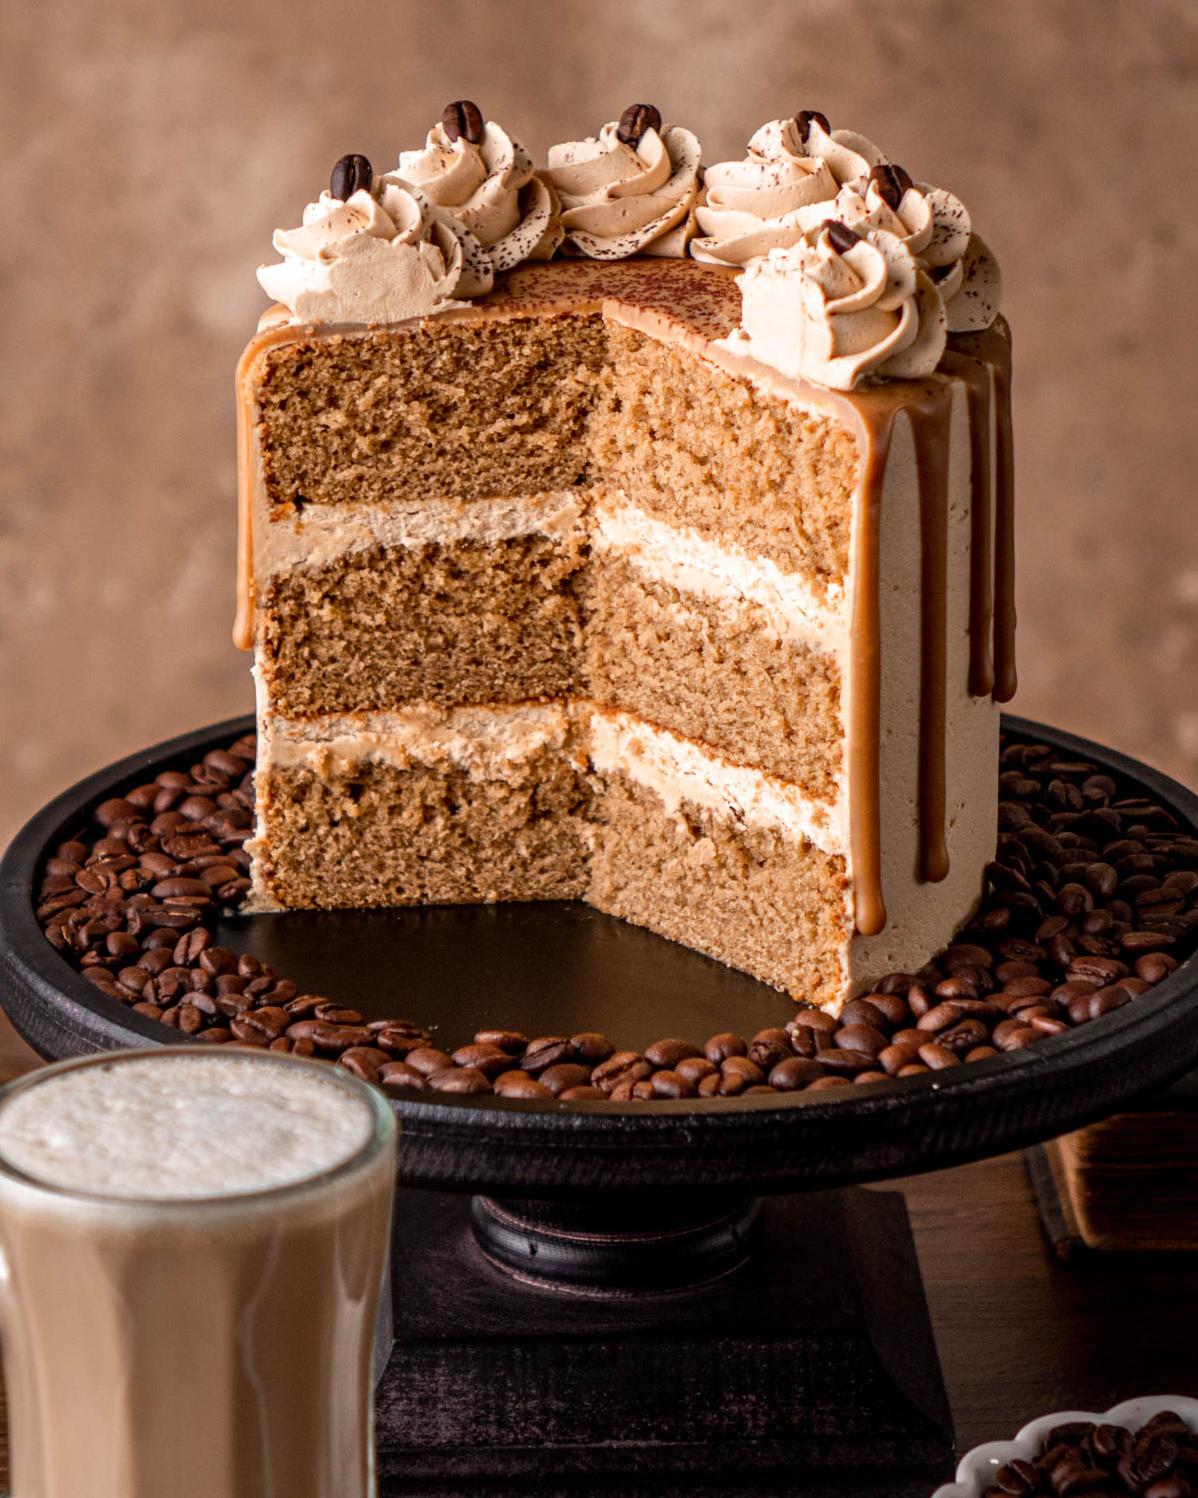  Get ready to indulge in the rich, creamy flavor of cappuccino cake.